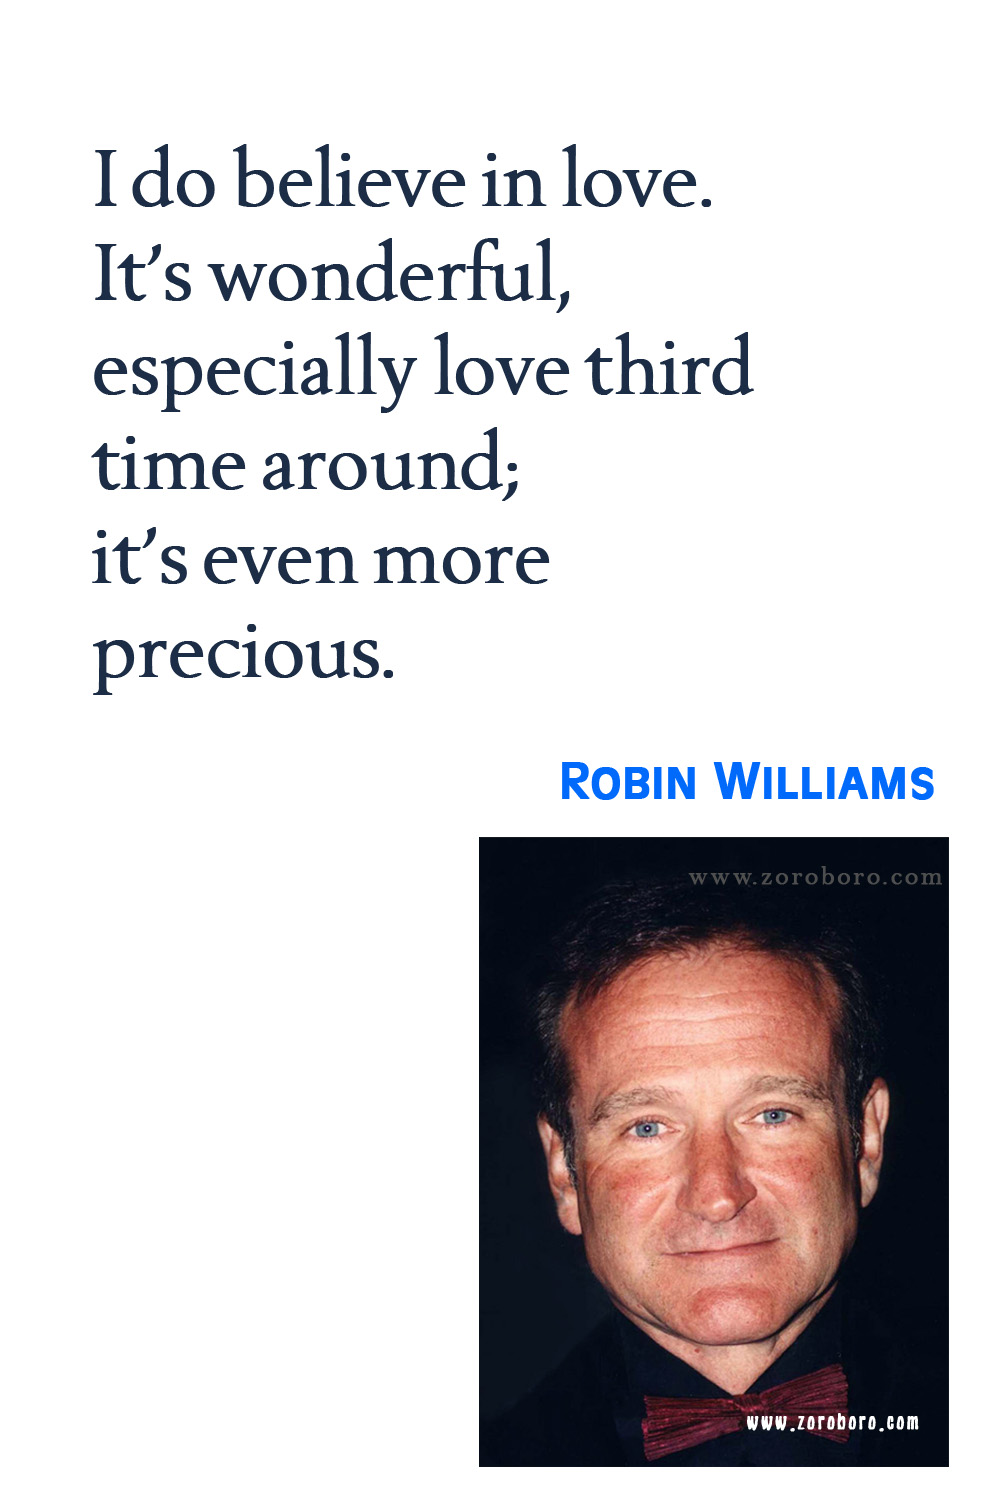 Robin Williams Quotes, Robin Williams Funny Quotes, Robin Williams Movies Quotes, Robin Williams Quotes on Comedy, Life, Love, and Happiness. Robin Williams Quotes.